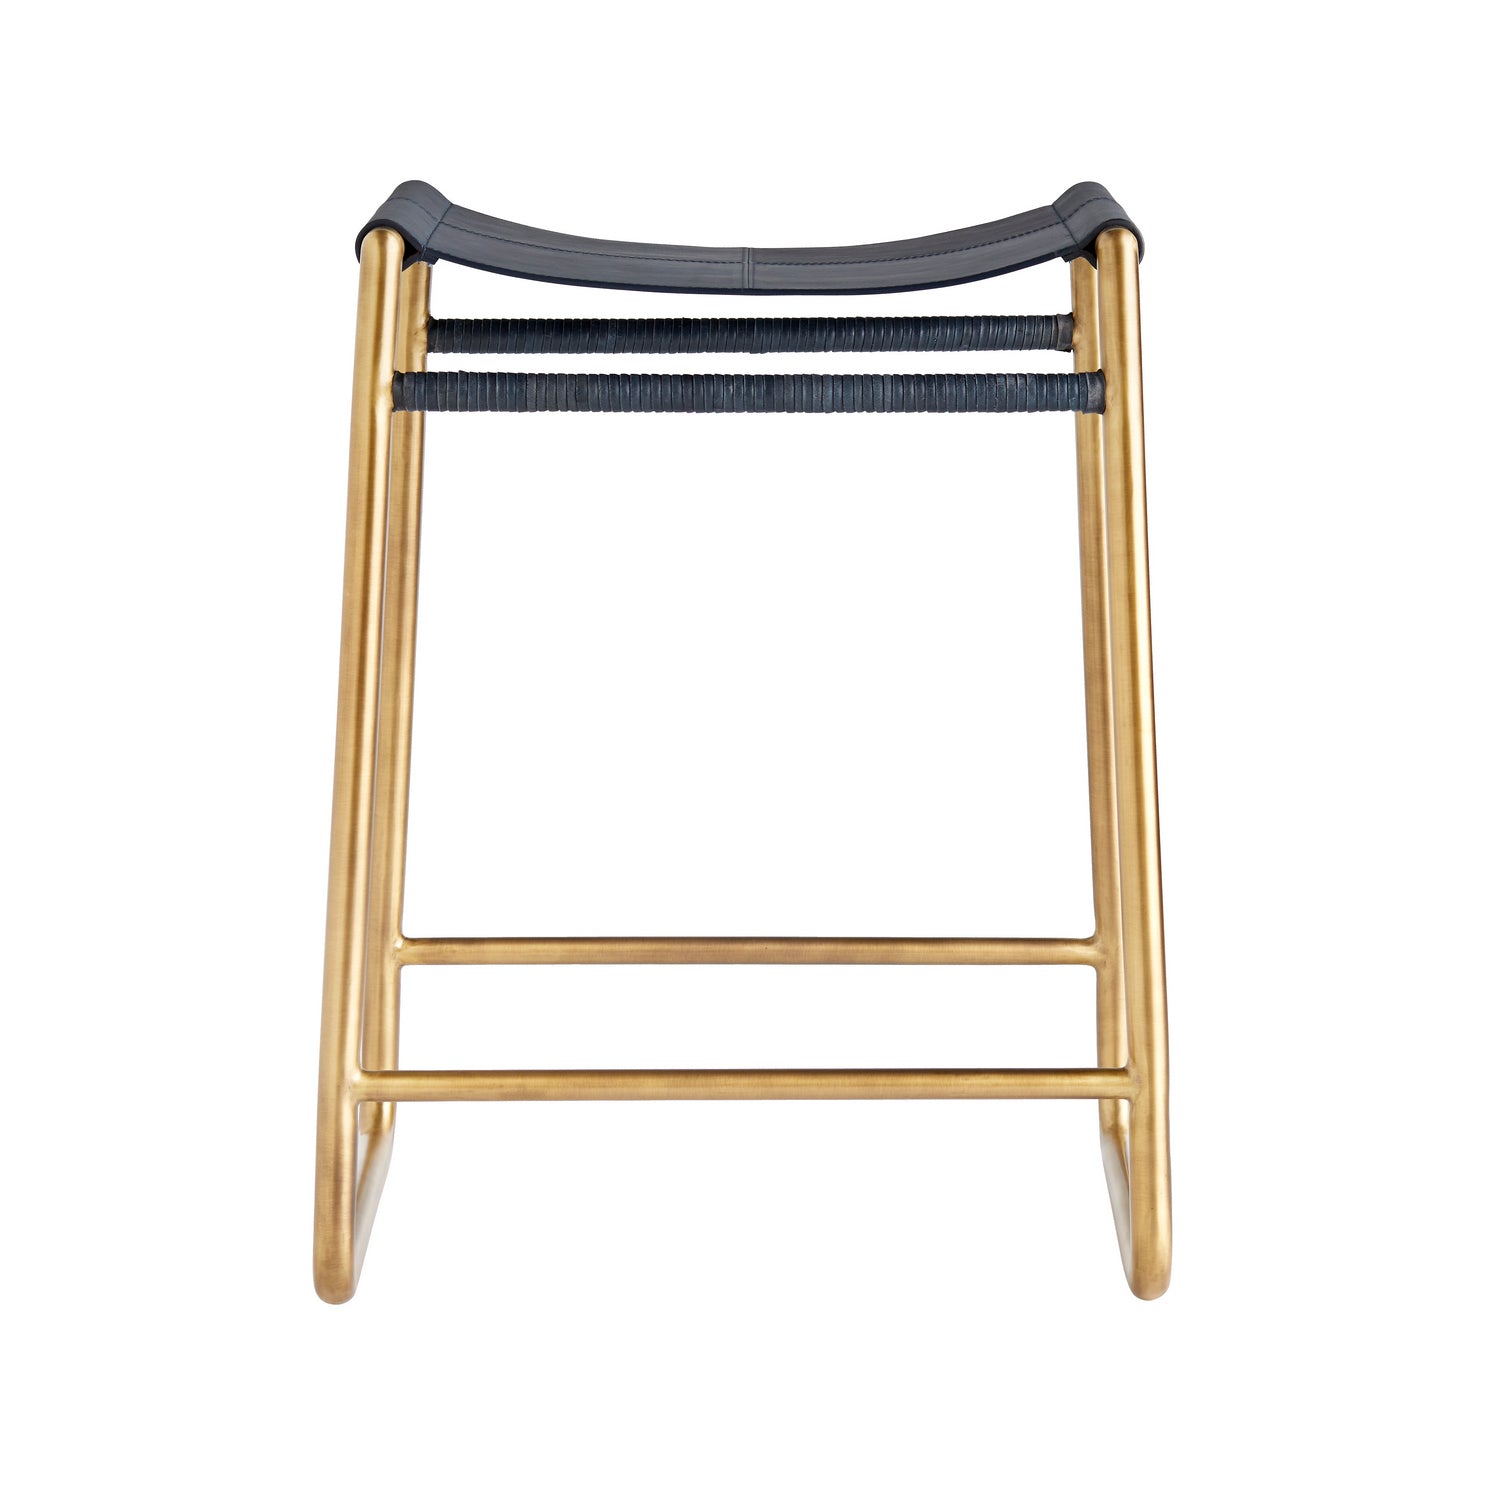 Counter Stool from the Gasper collection in Indigo finish